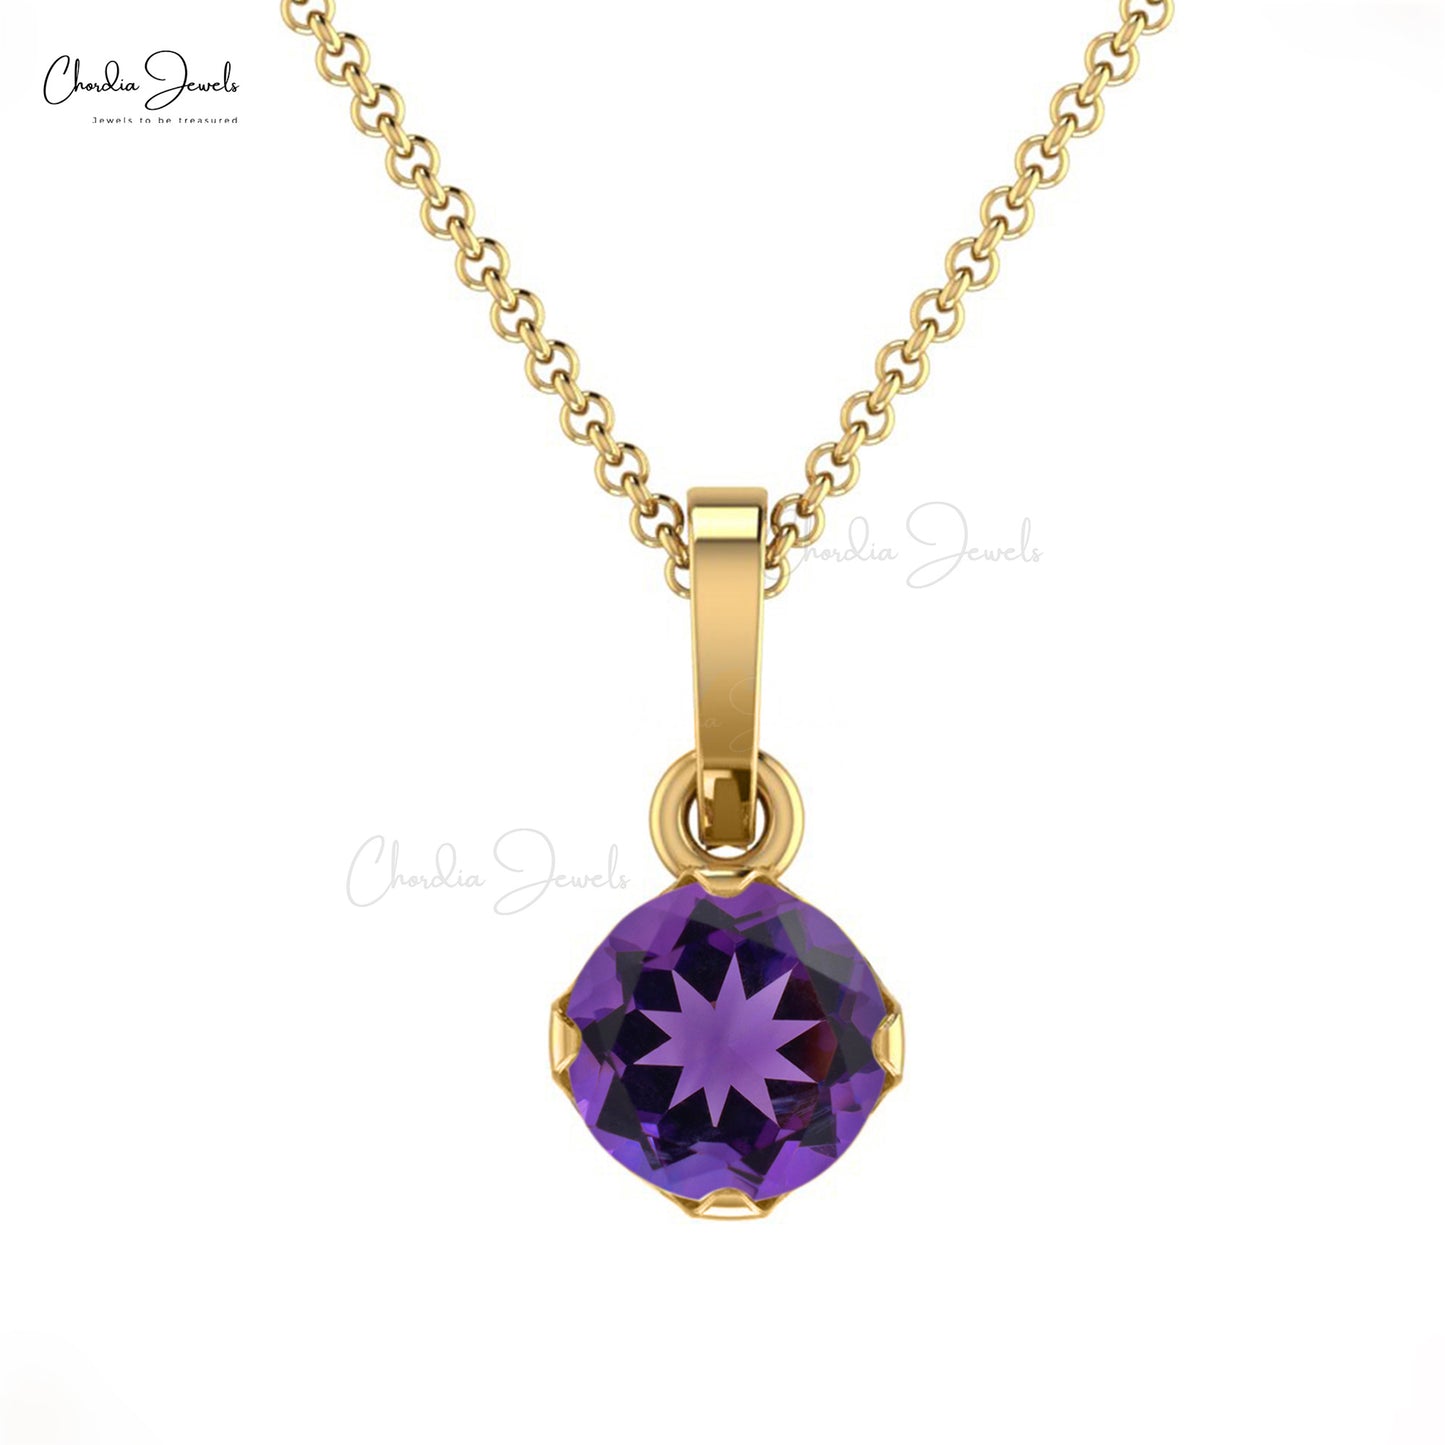 Natural Amethyst Solitaire Pendant, 14k Solid Gold Handmade Prong Set Pendant, 4mm Round Faceted Gemstone Pendant for Women's